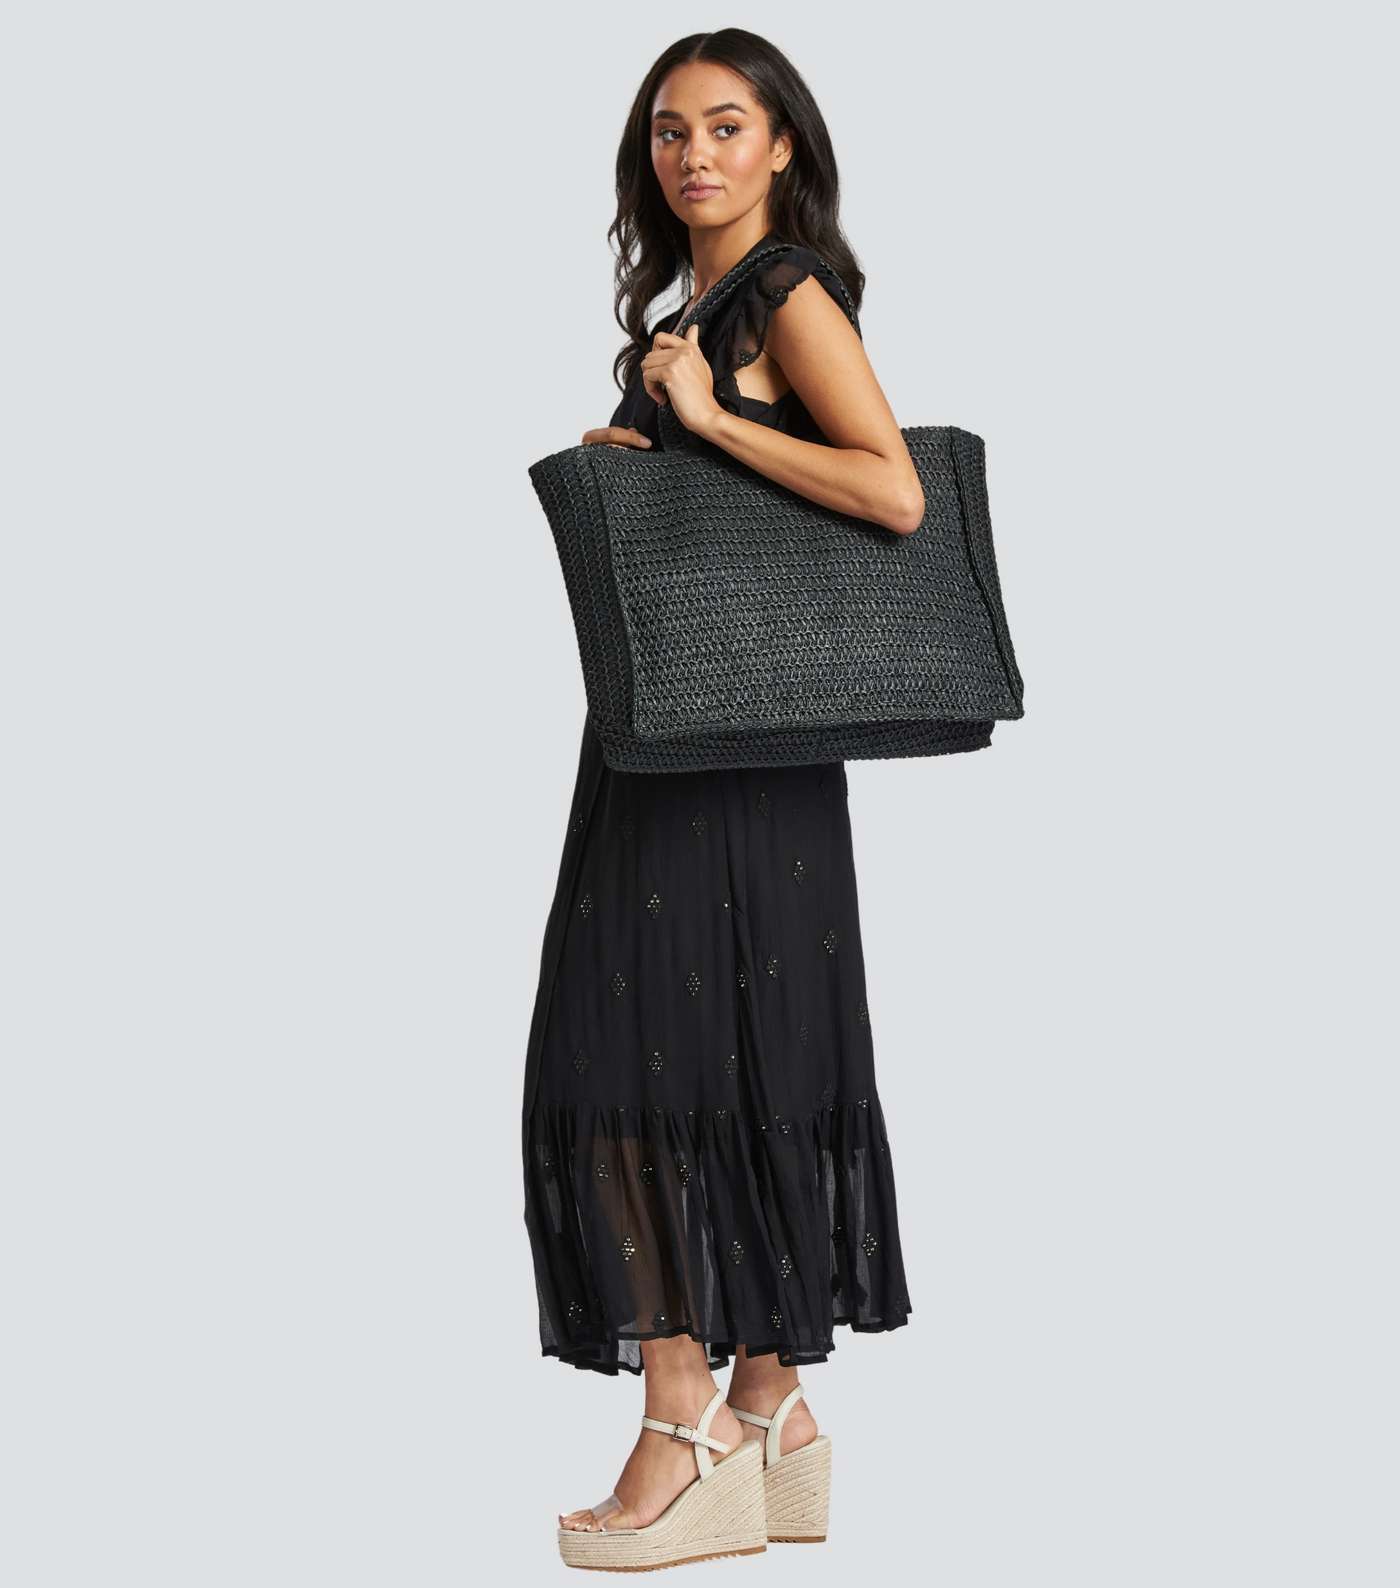 South Beach Black Woven Straw Effect Tote Bag Image 3